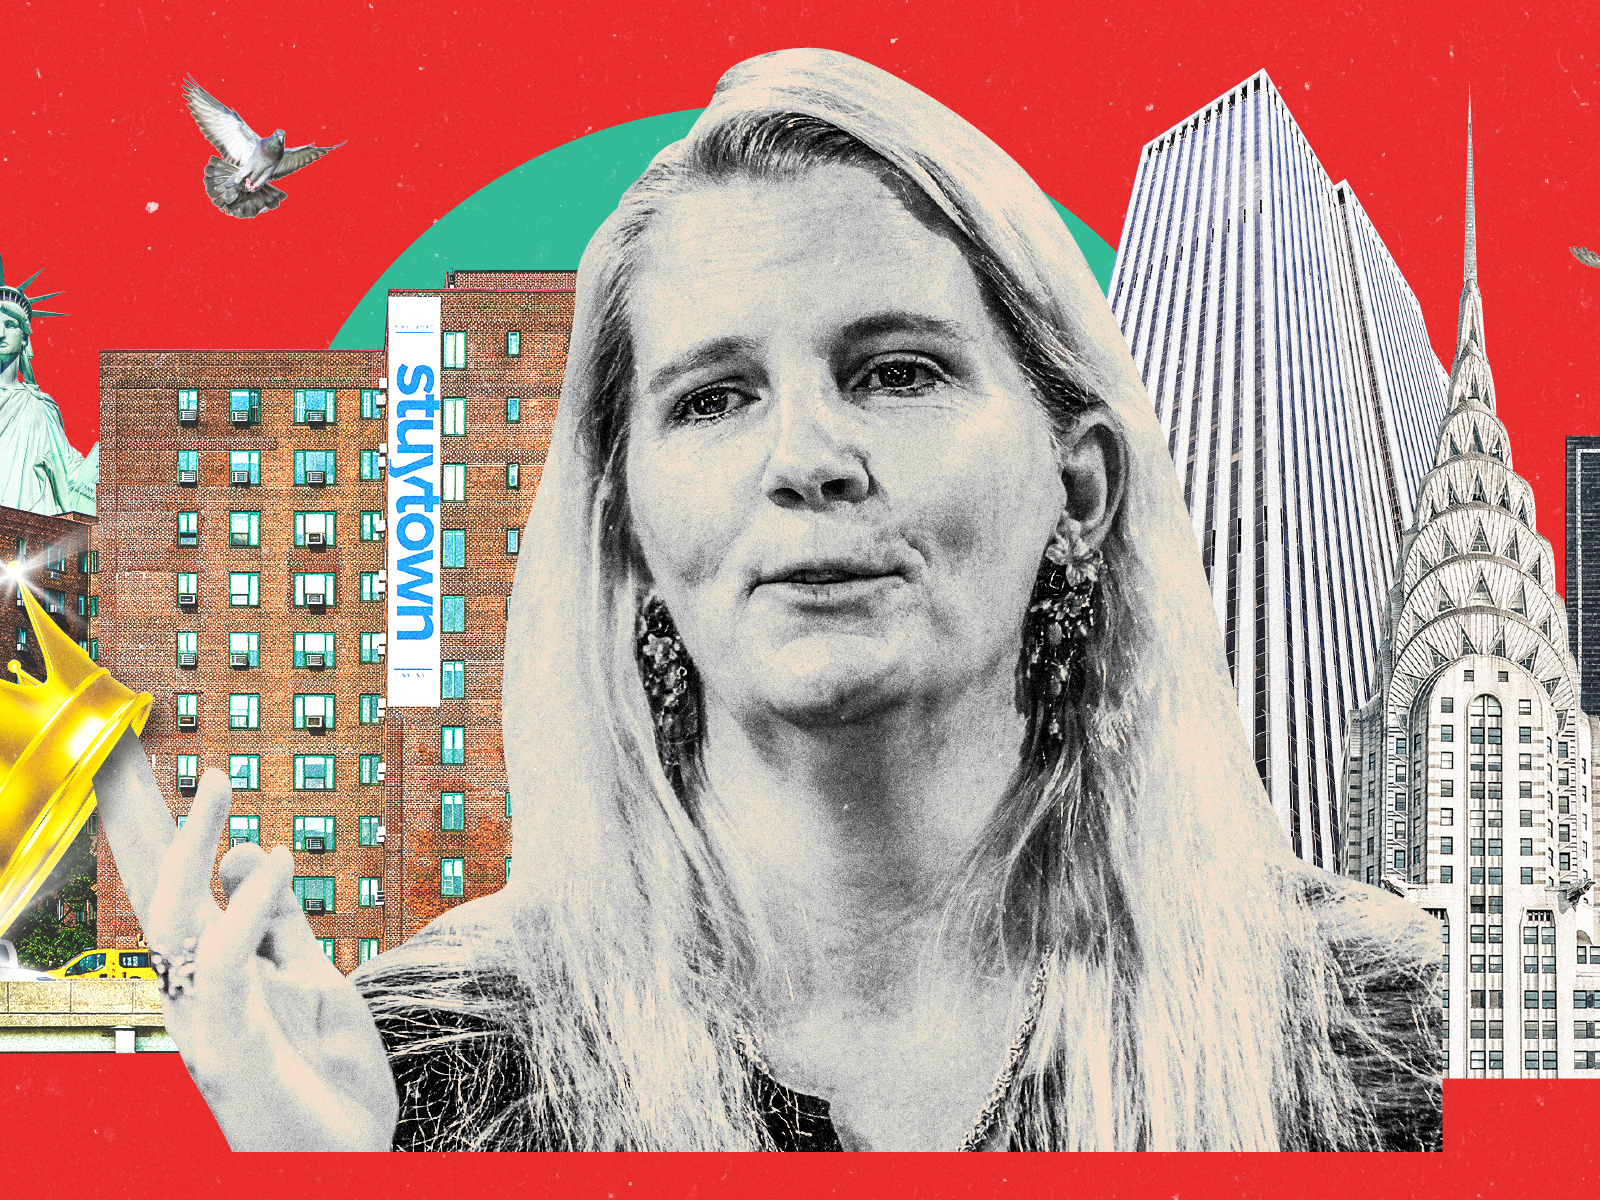 Darcy Stacom, Head of the NYC Capital Markets Group at CBRE, with a crown dangling off her hand surrounded by StuyTown apartments, GM Building, Chelsea Market signage, and the Chrysler building with the Statue of Liberty and pigeons behind her on a red background.